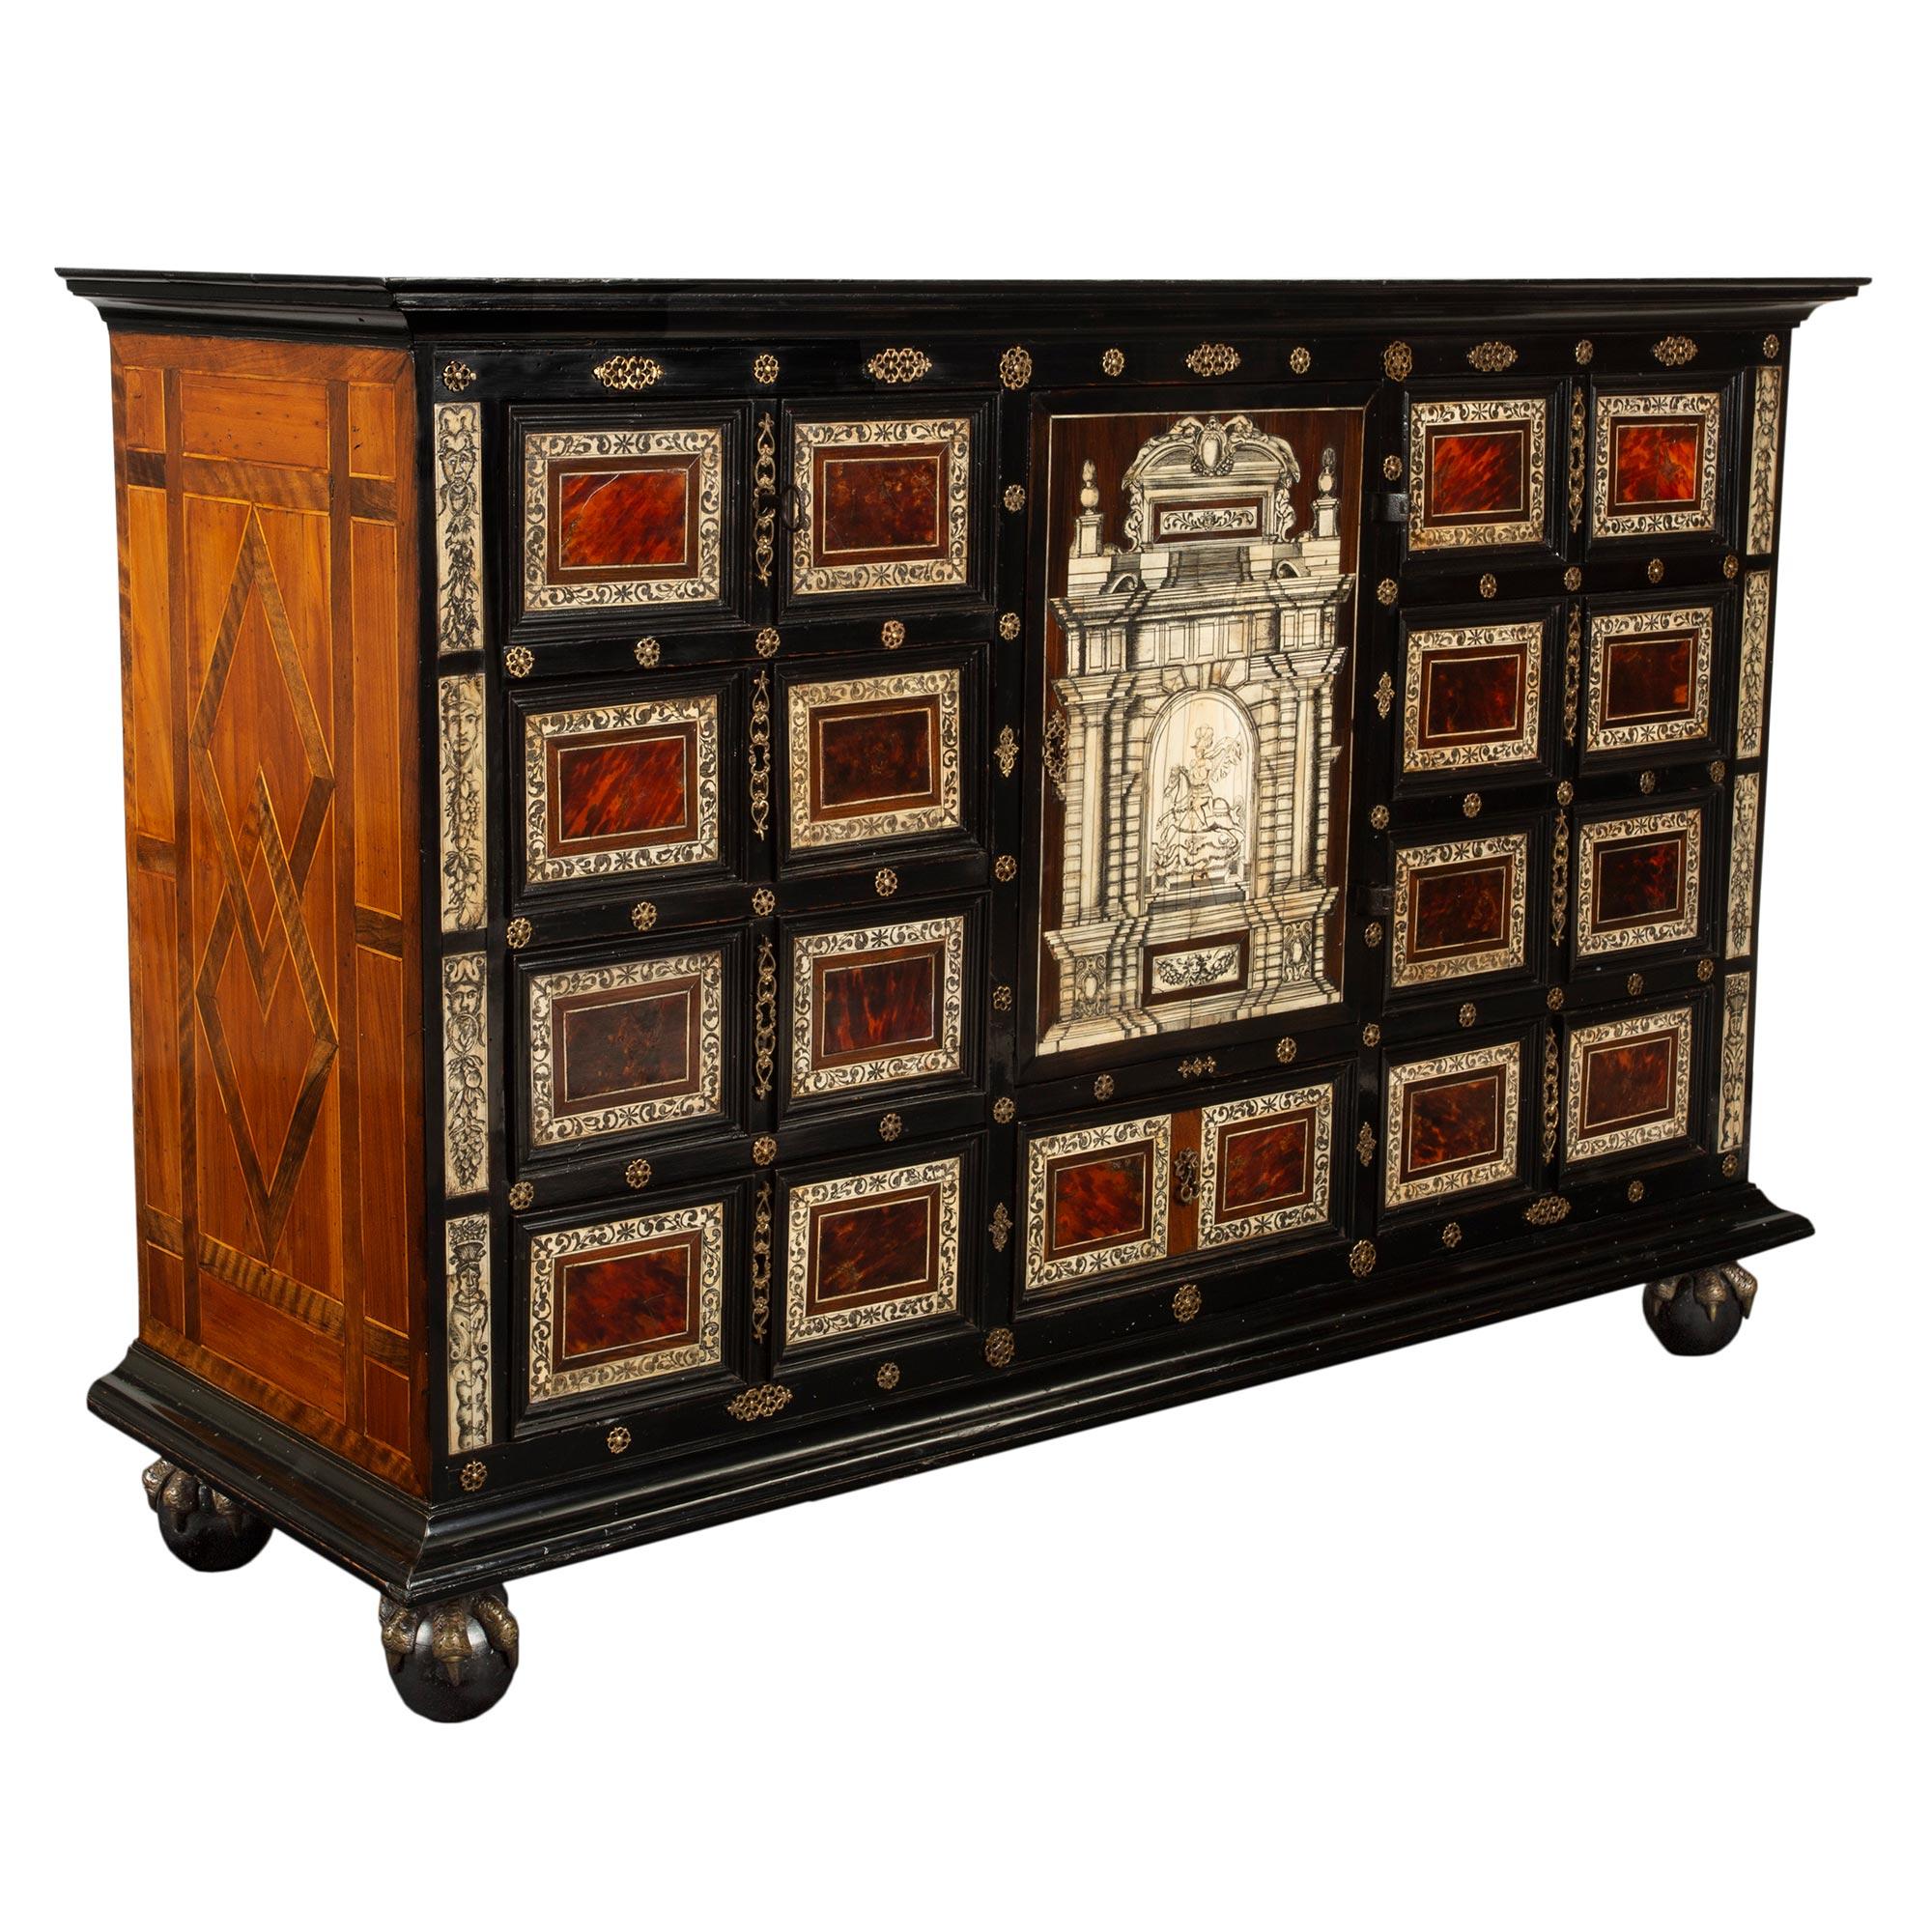 A stunning Italian early 18th century Baroque period ebonized fruit wood, tortoiseshell and bone ten drawer, one door specimen cabinet. The cabinet is raised by claw and ball feet below a mottled border. Each drawer displays two exquisite central